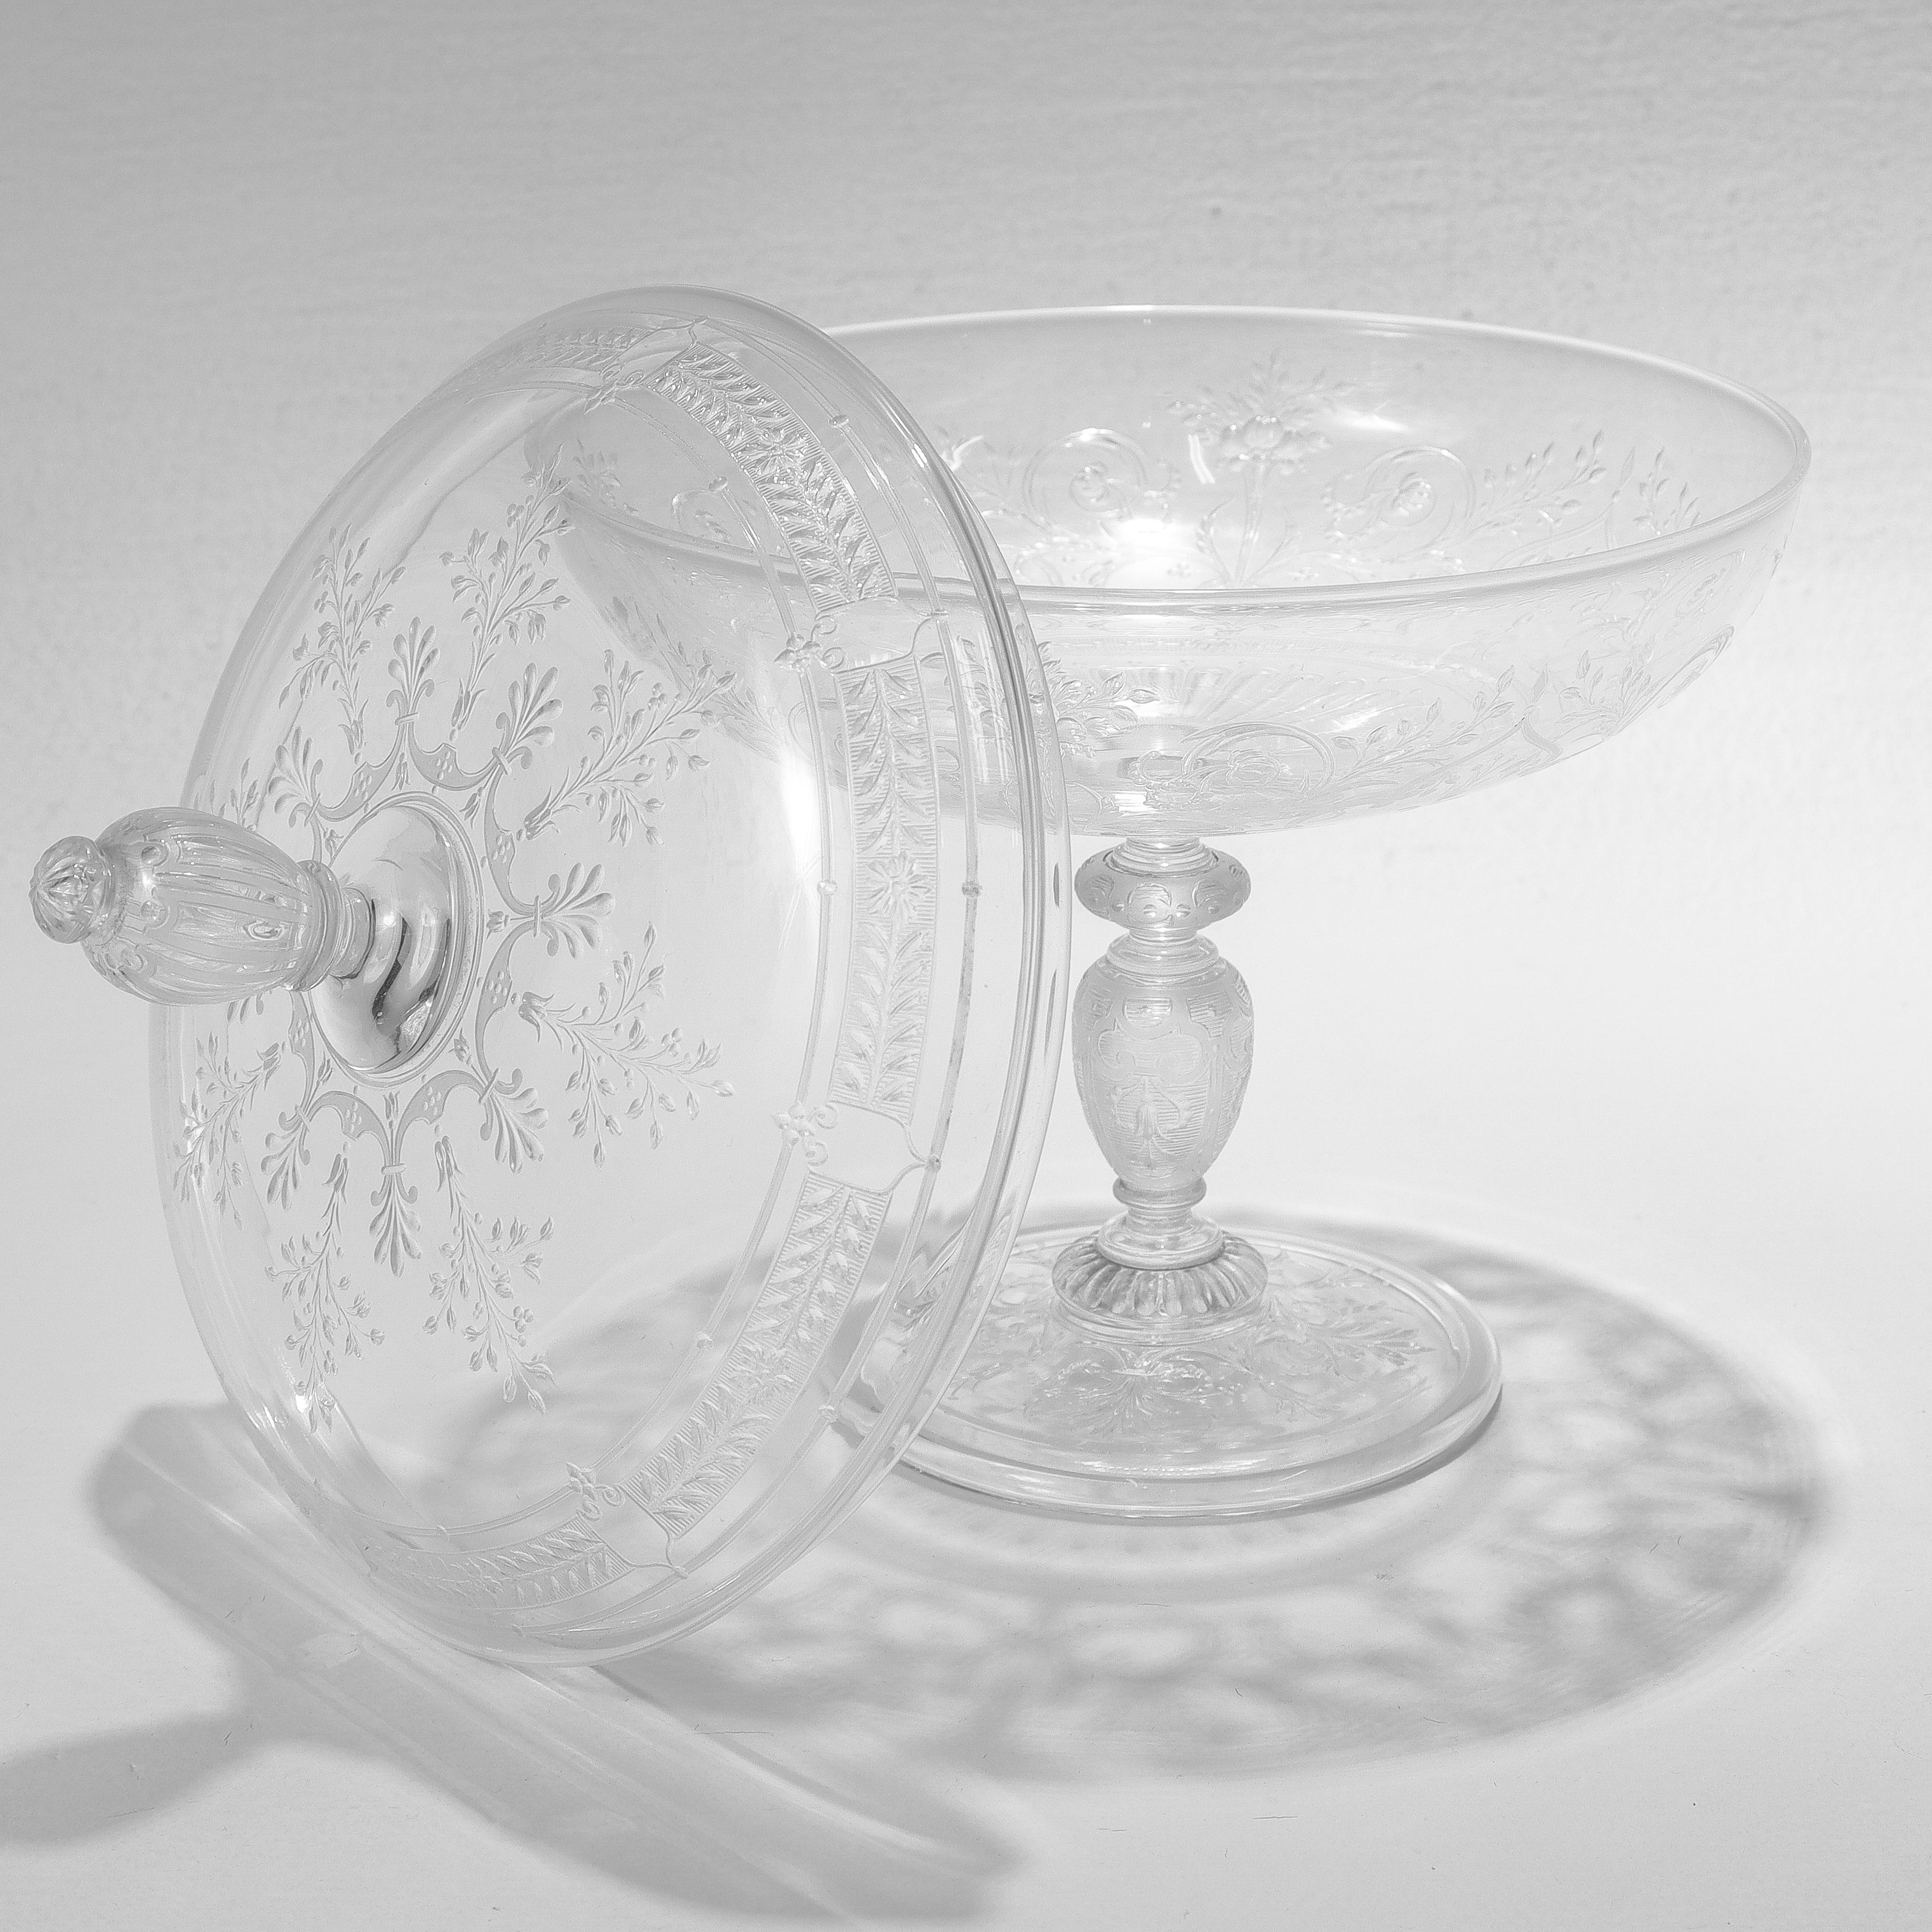 Victorian Antique Stourbridge Etched & Engraved Glass Lidded Compote or Tazza For Sale